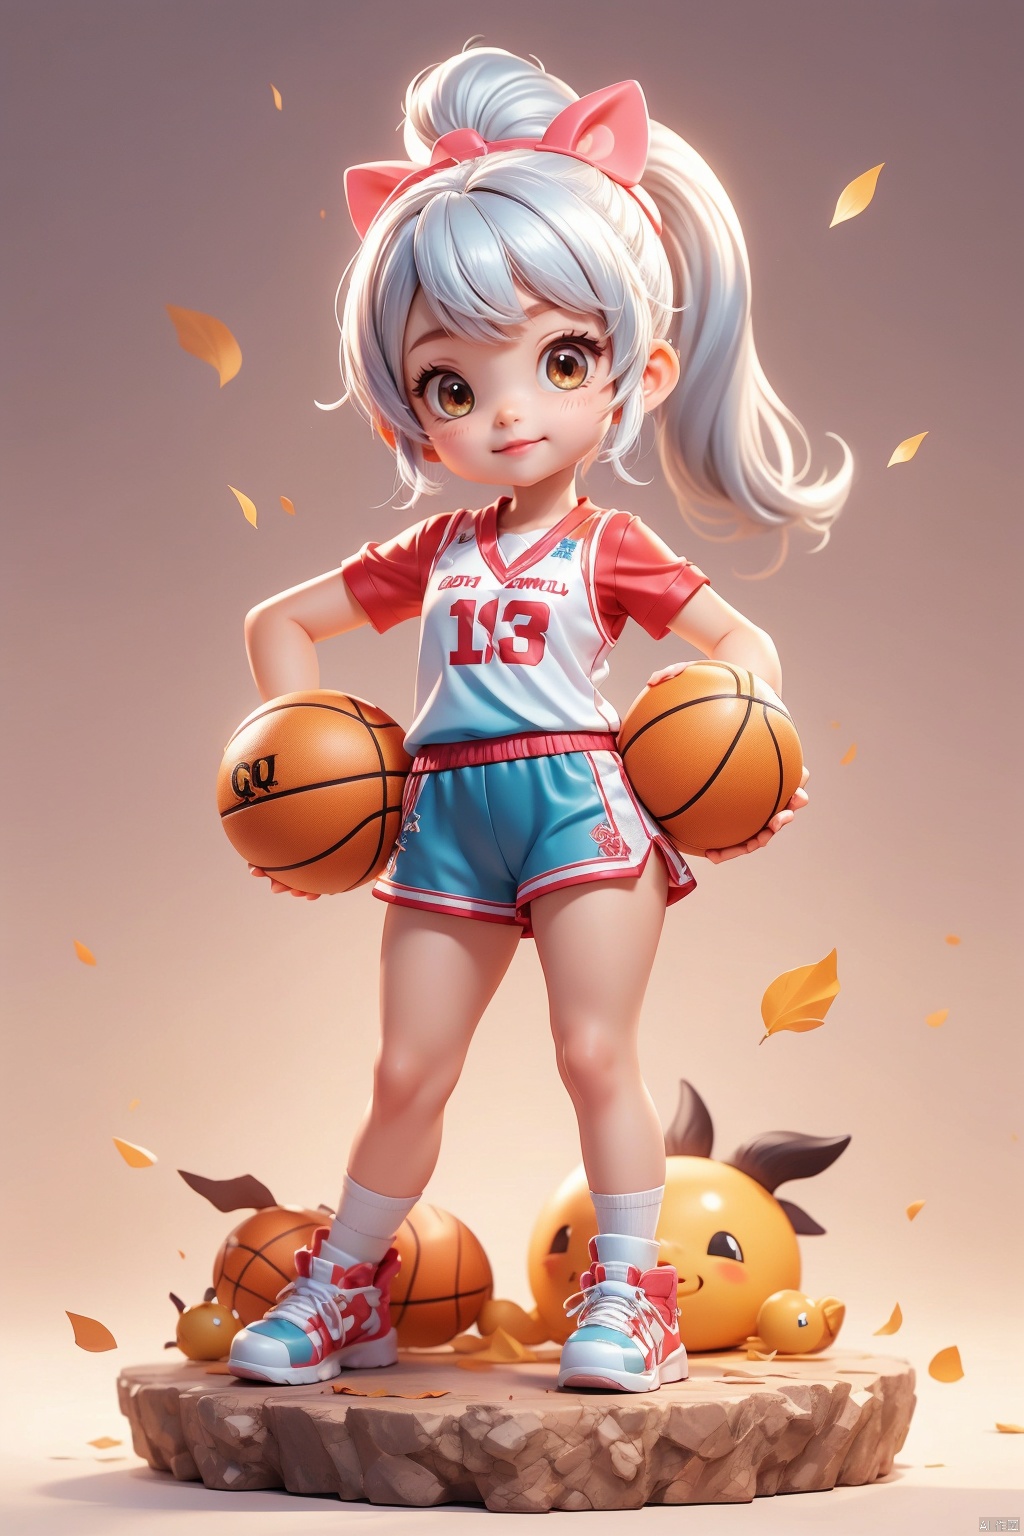 1 girl, 3 years old, solo, (Q version :1.6), IP, determined expression, horns, animal features, blush, basketball uniform, simple white background, silver hair, side ponytail, hands on hips